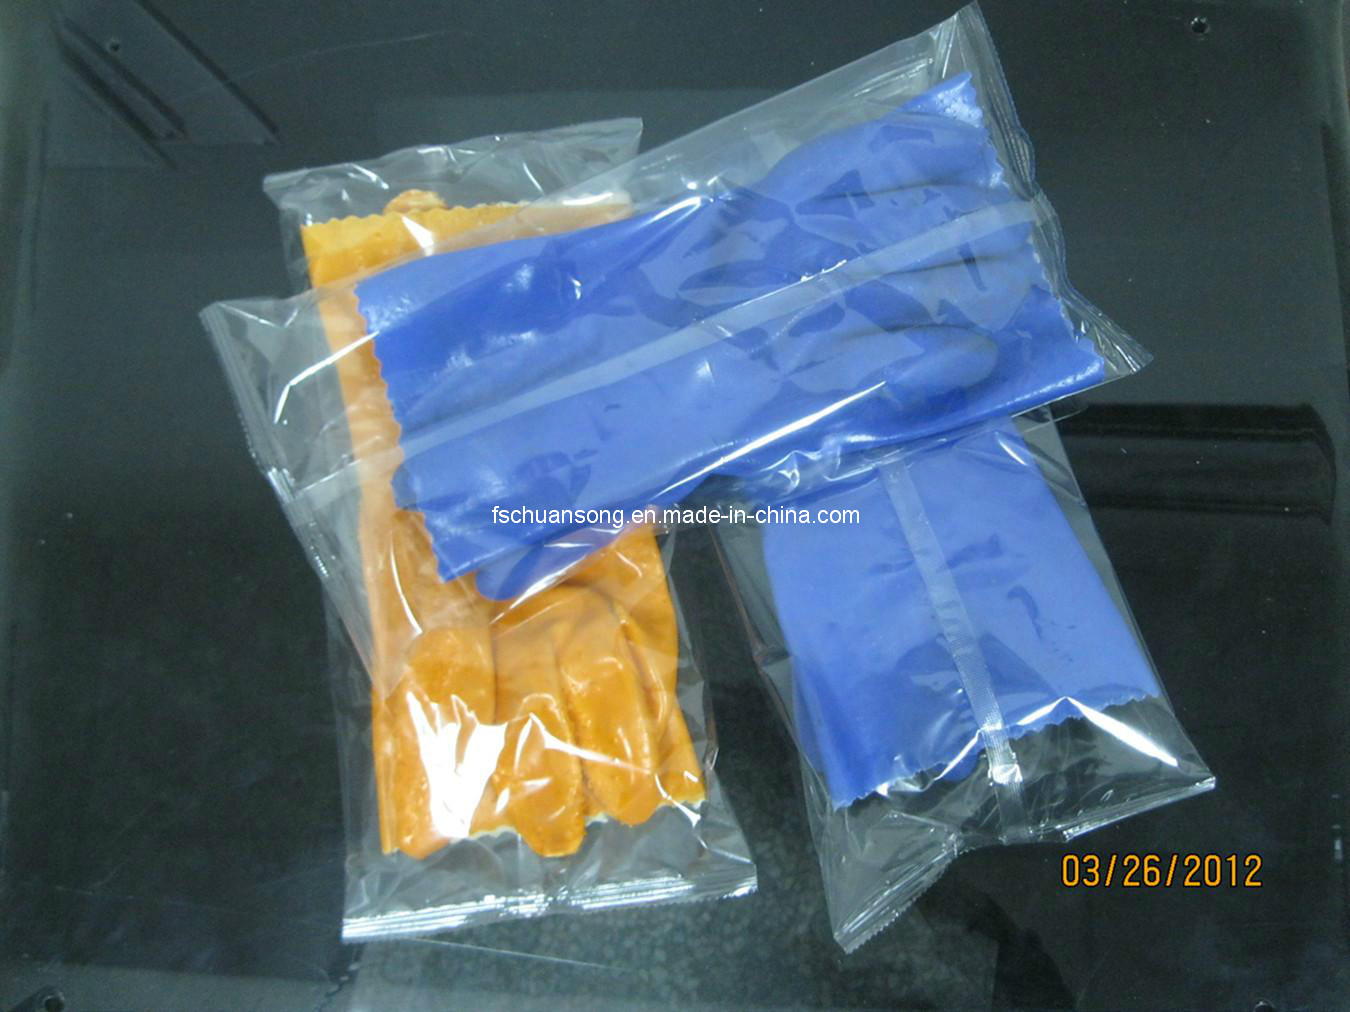 Surgical Gloves Automatic Packaging Machinery (DCTWB-350X)